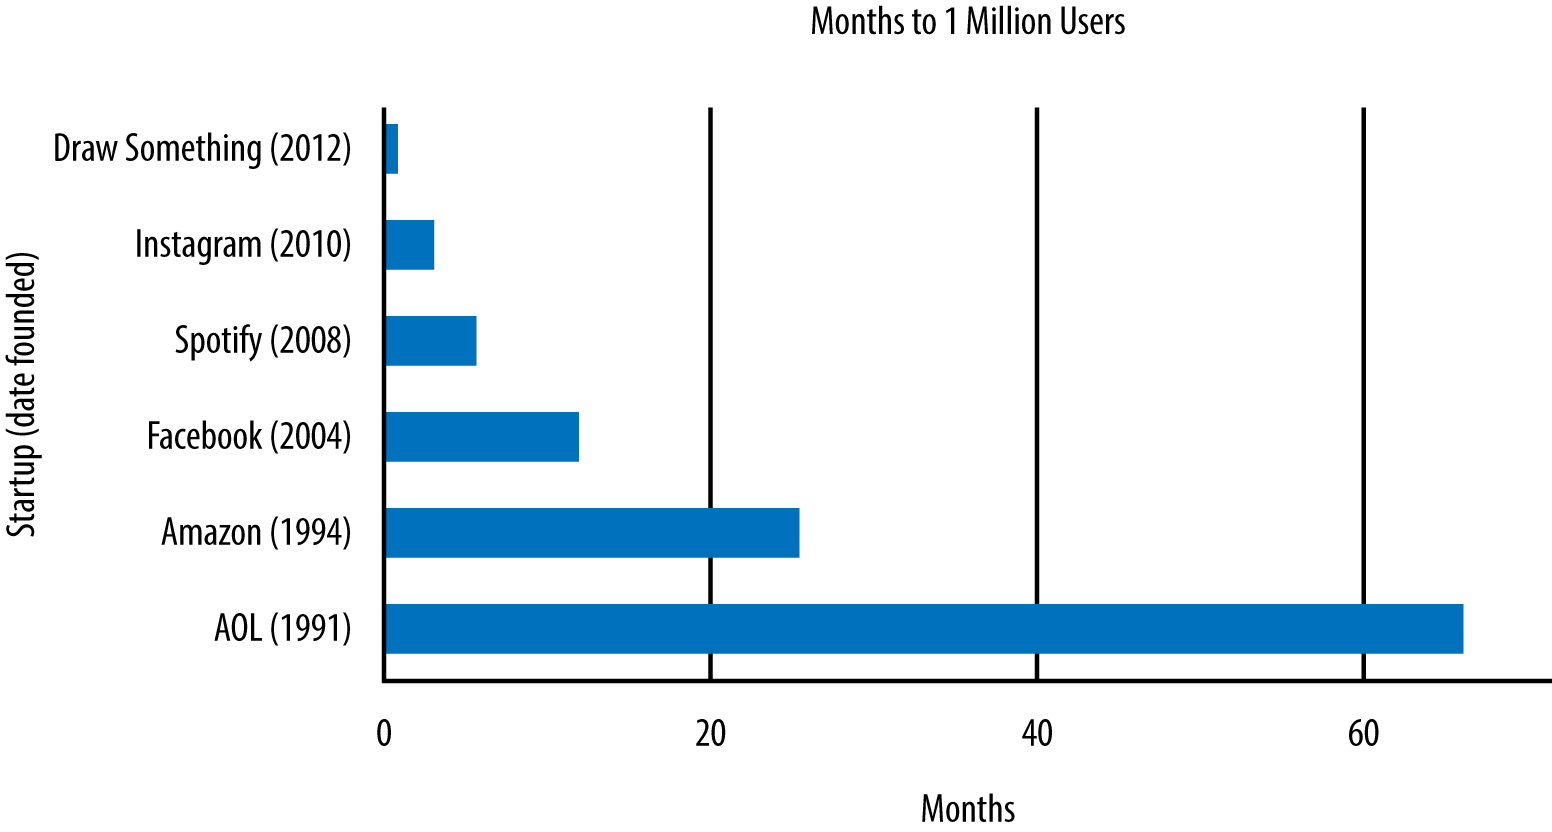 Months to 1 million users